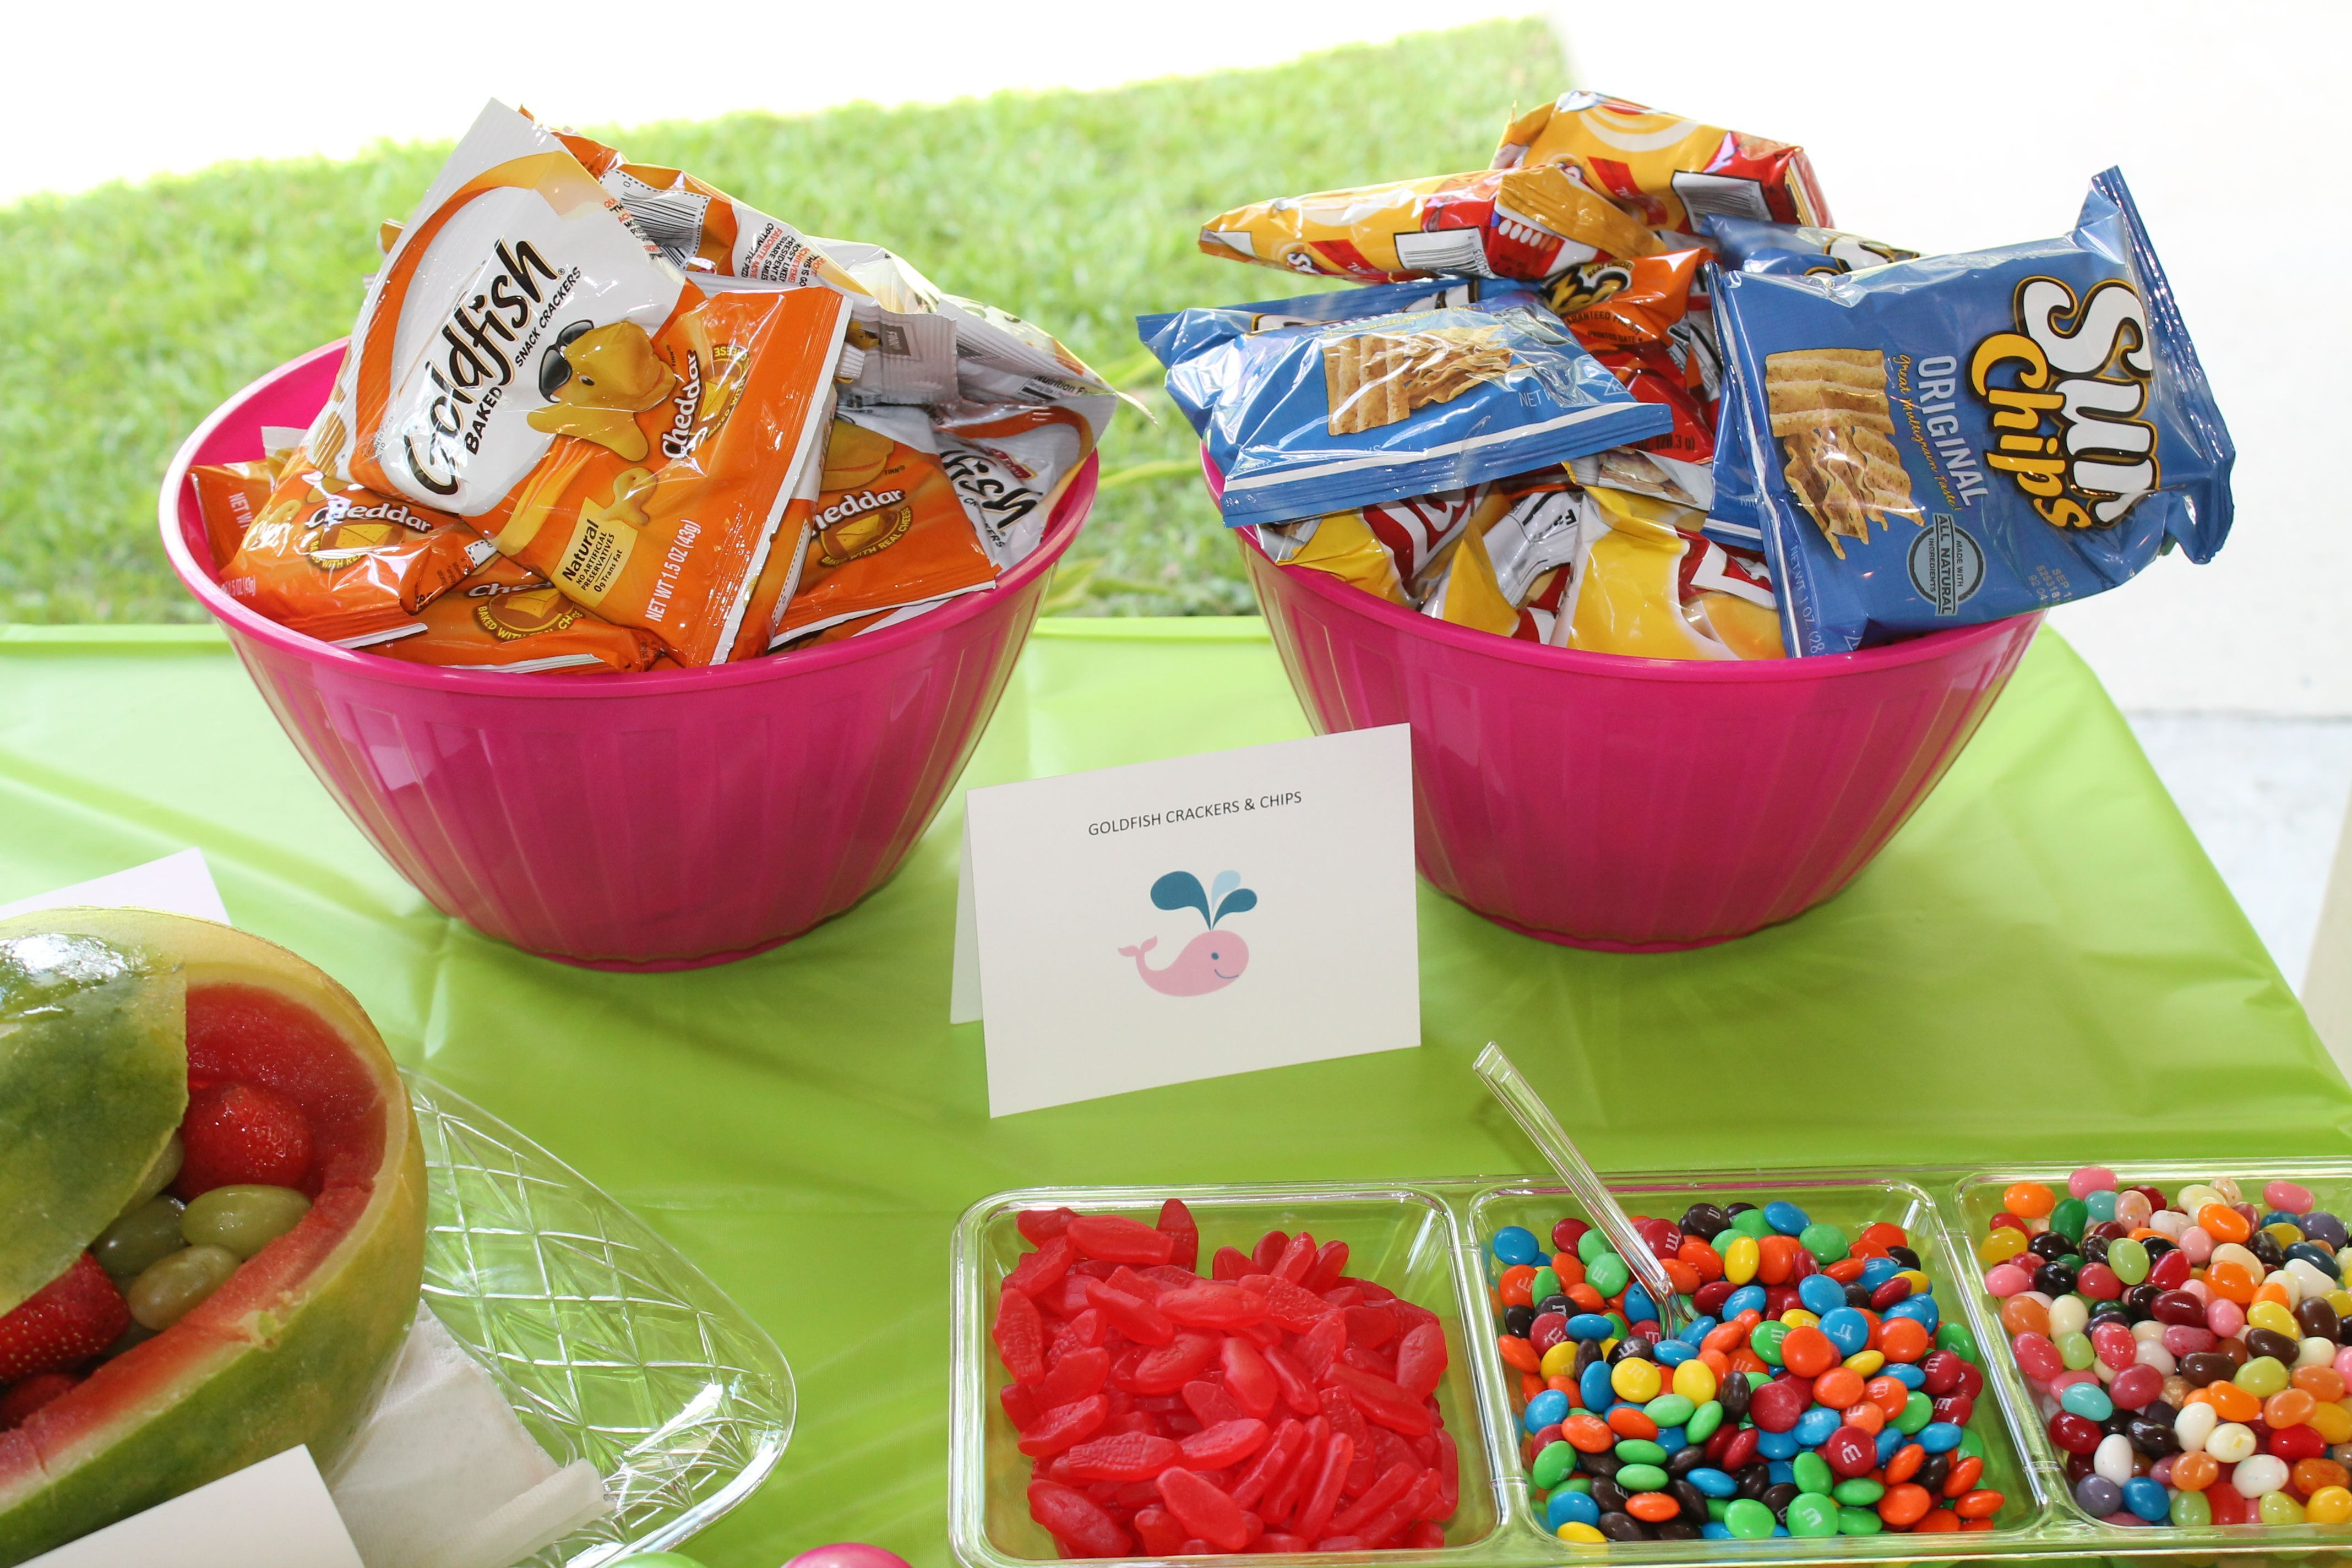 Kid Pool Party Food Ideas
 Goldfish crackers fit the theme but the chips were more